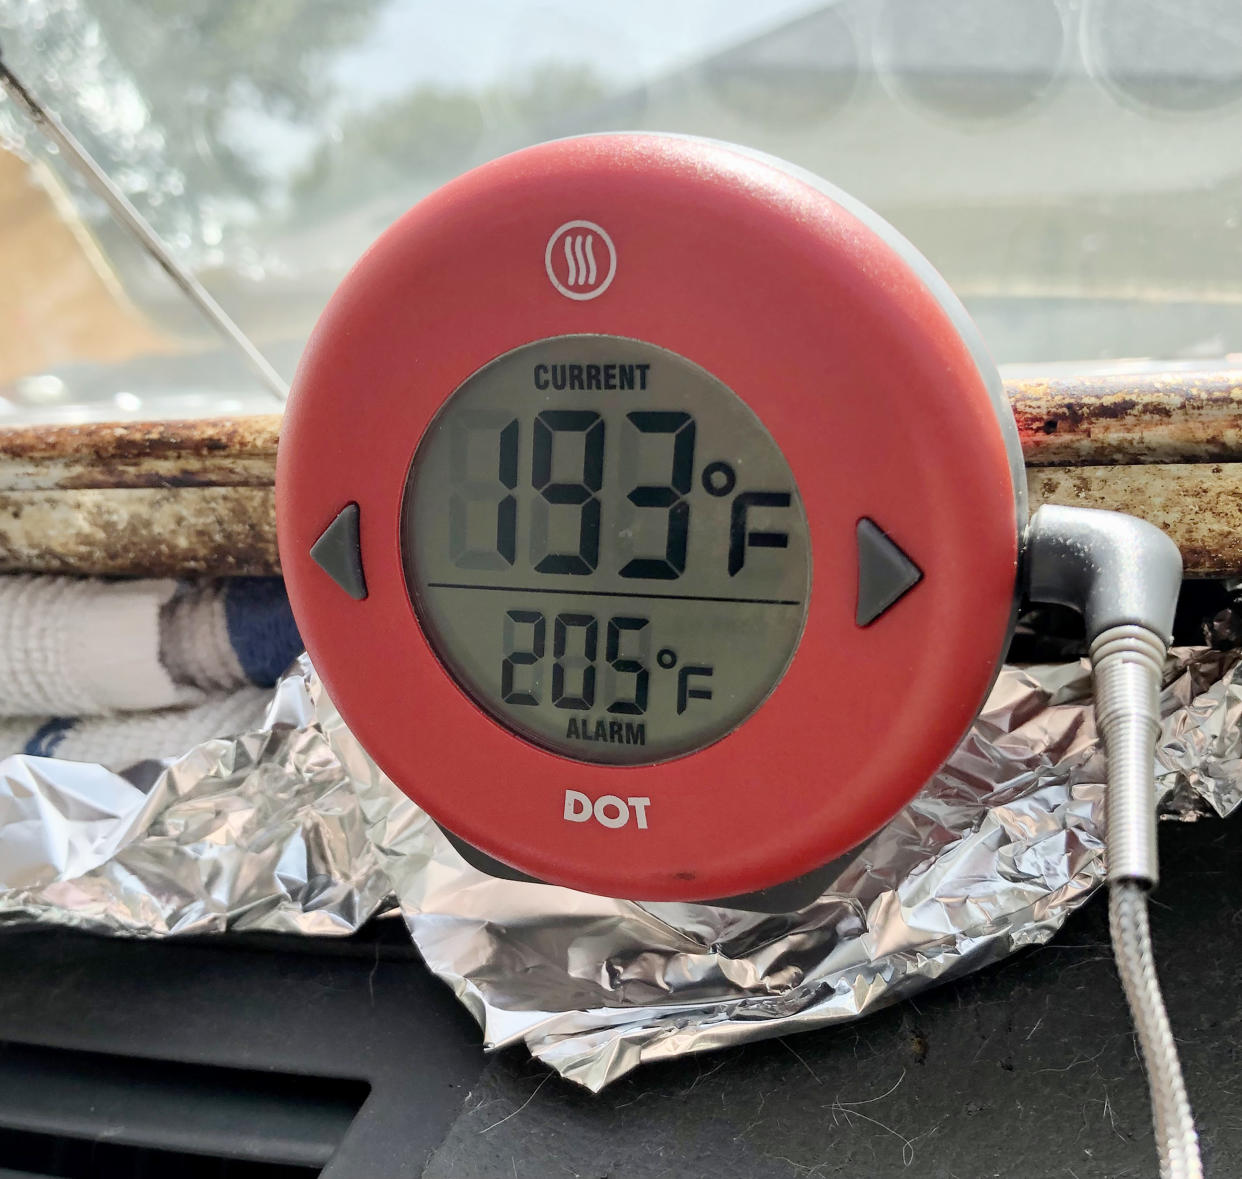 The internal temperature of my dashboard cupcakes reached an incredible 193 F. (Heather Martin)